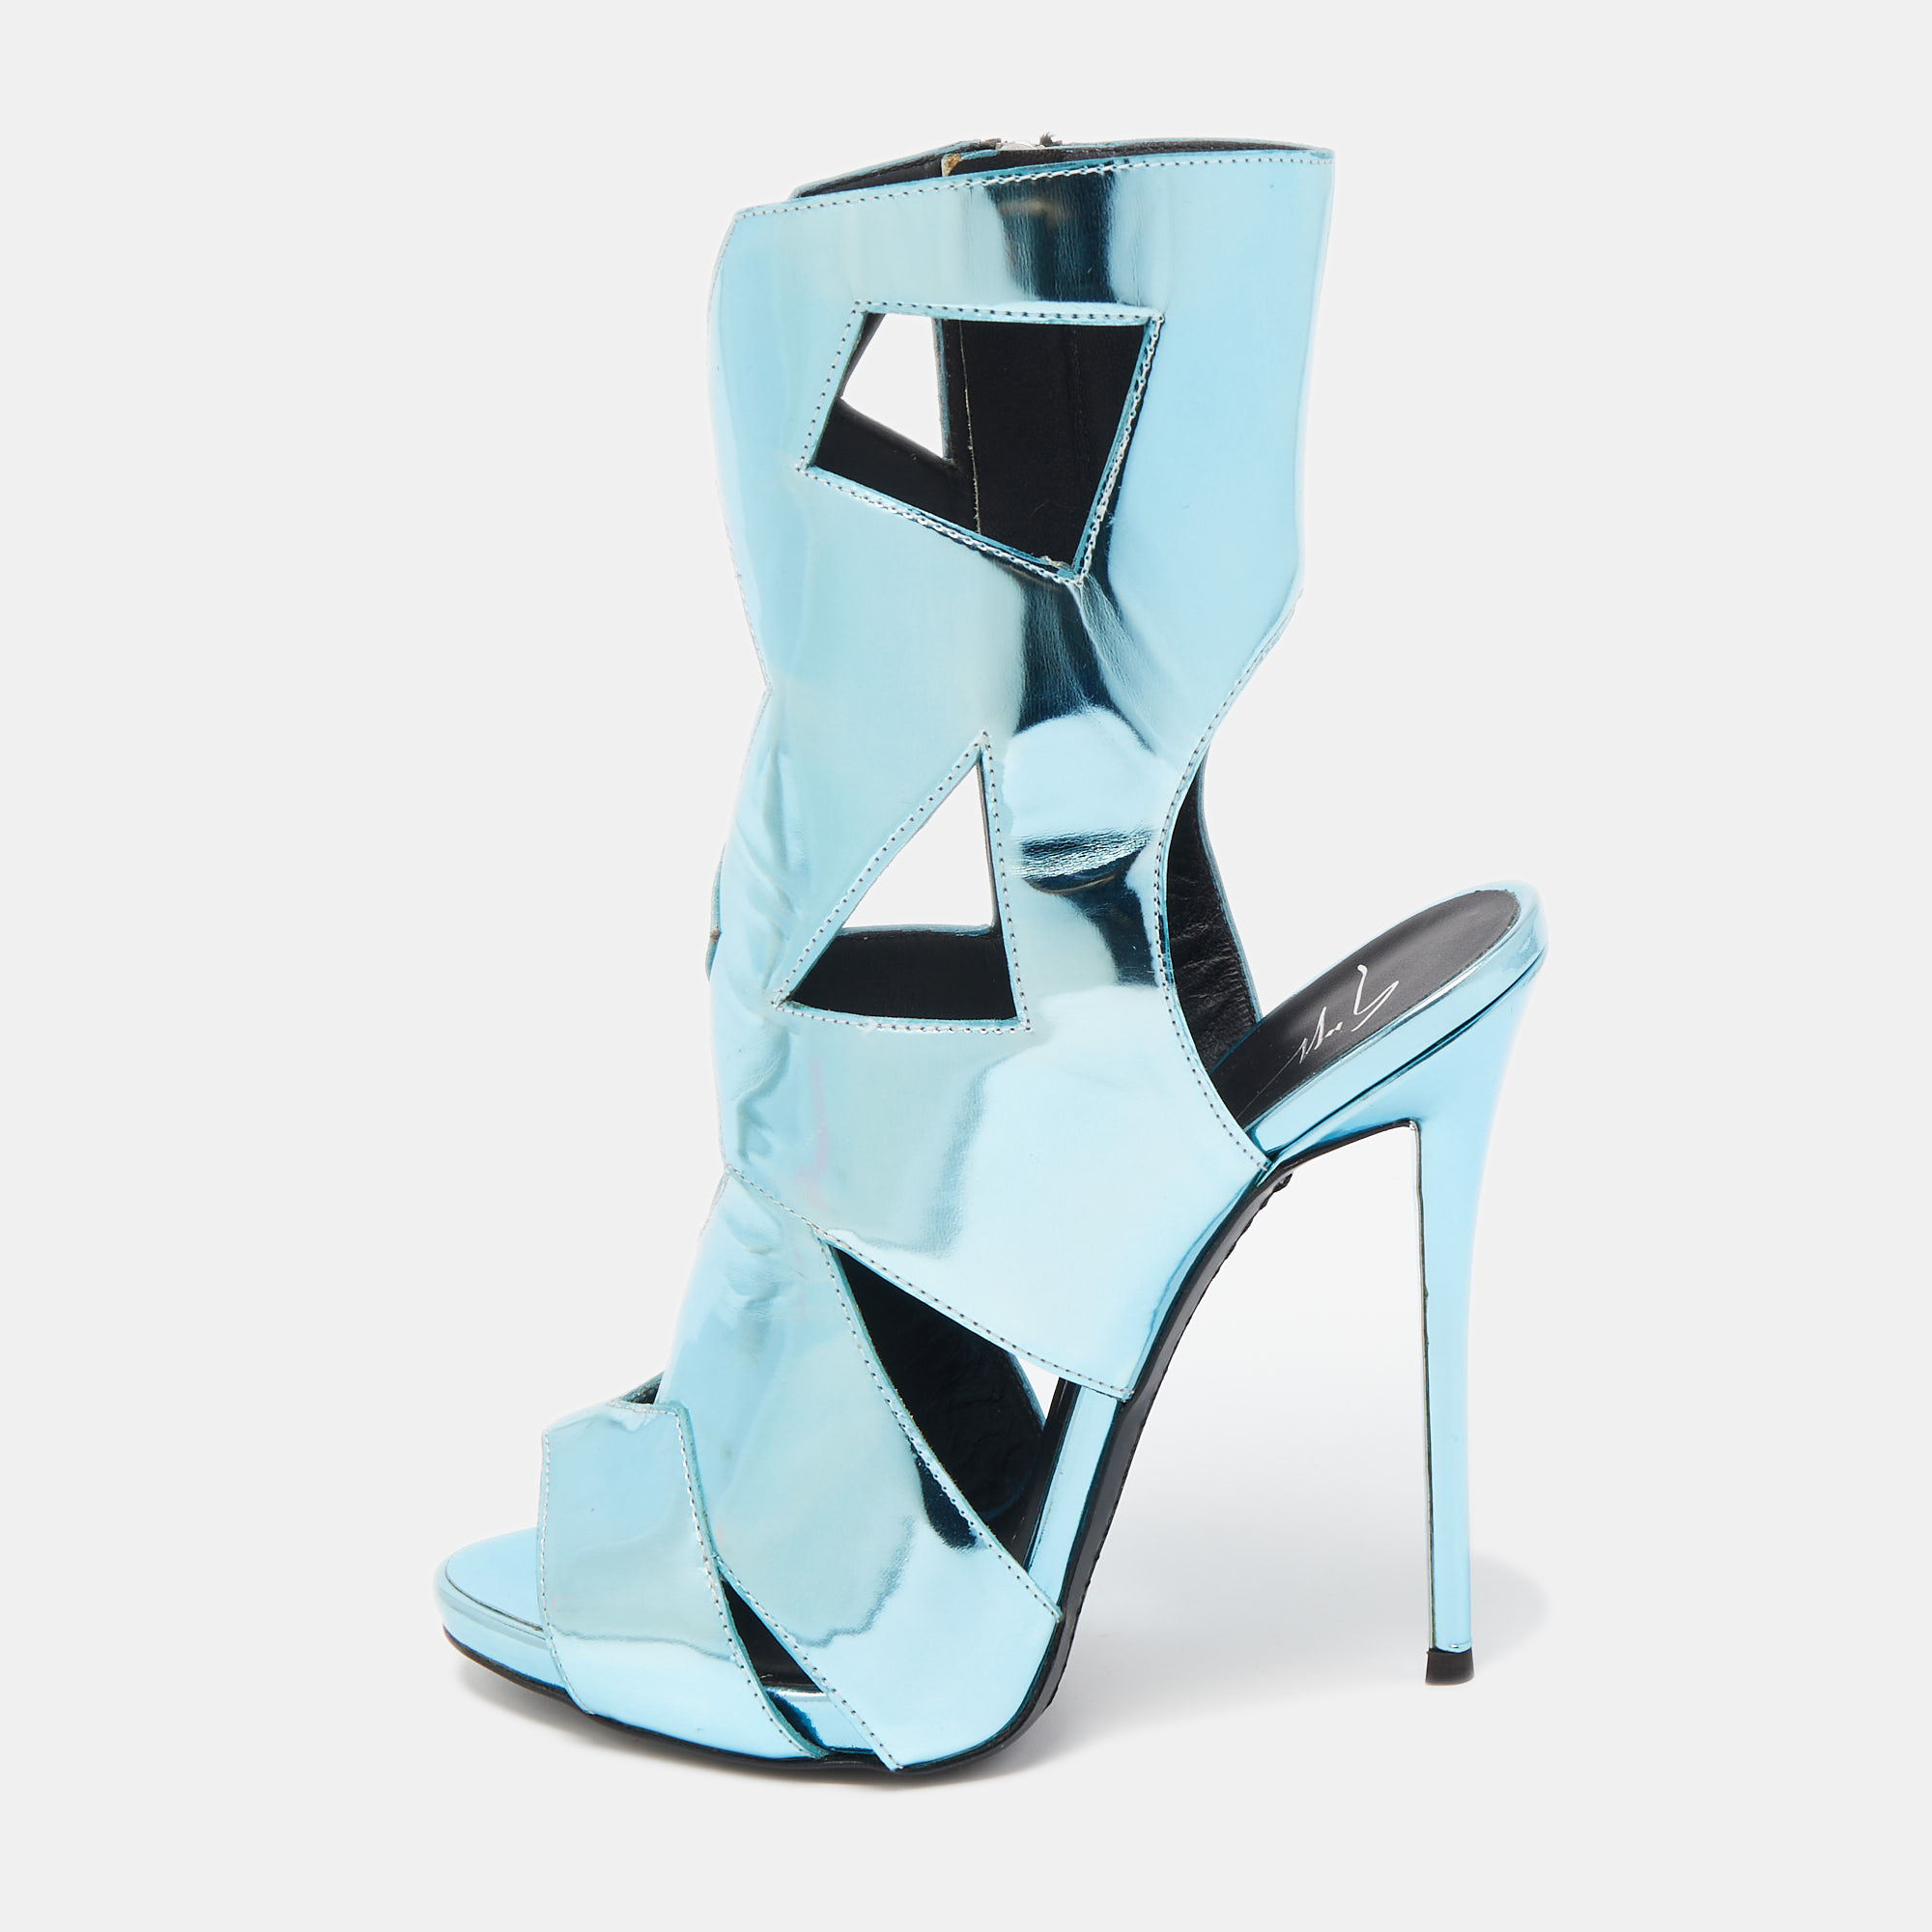 Giuseppe Zanotti Metallic Blue Leather Cut-Out Coline Ankle Booties Size 36